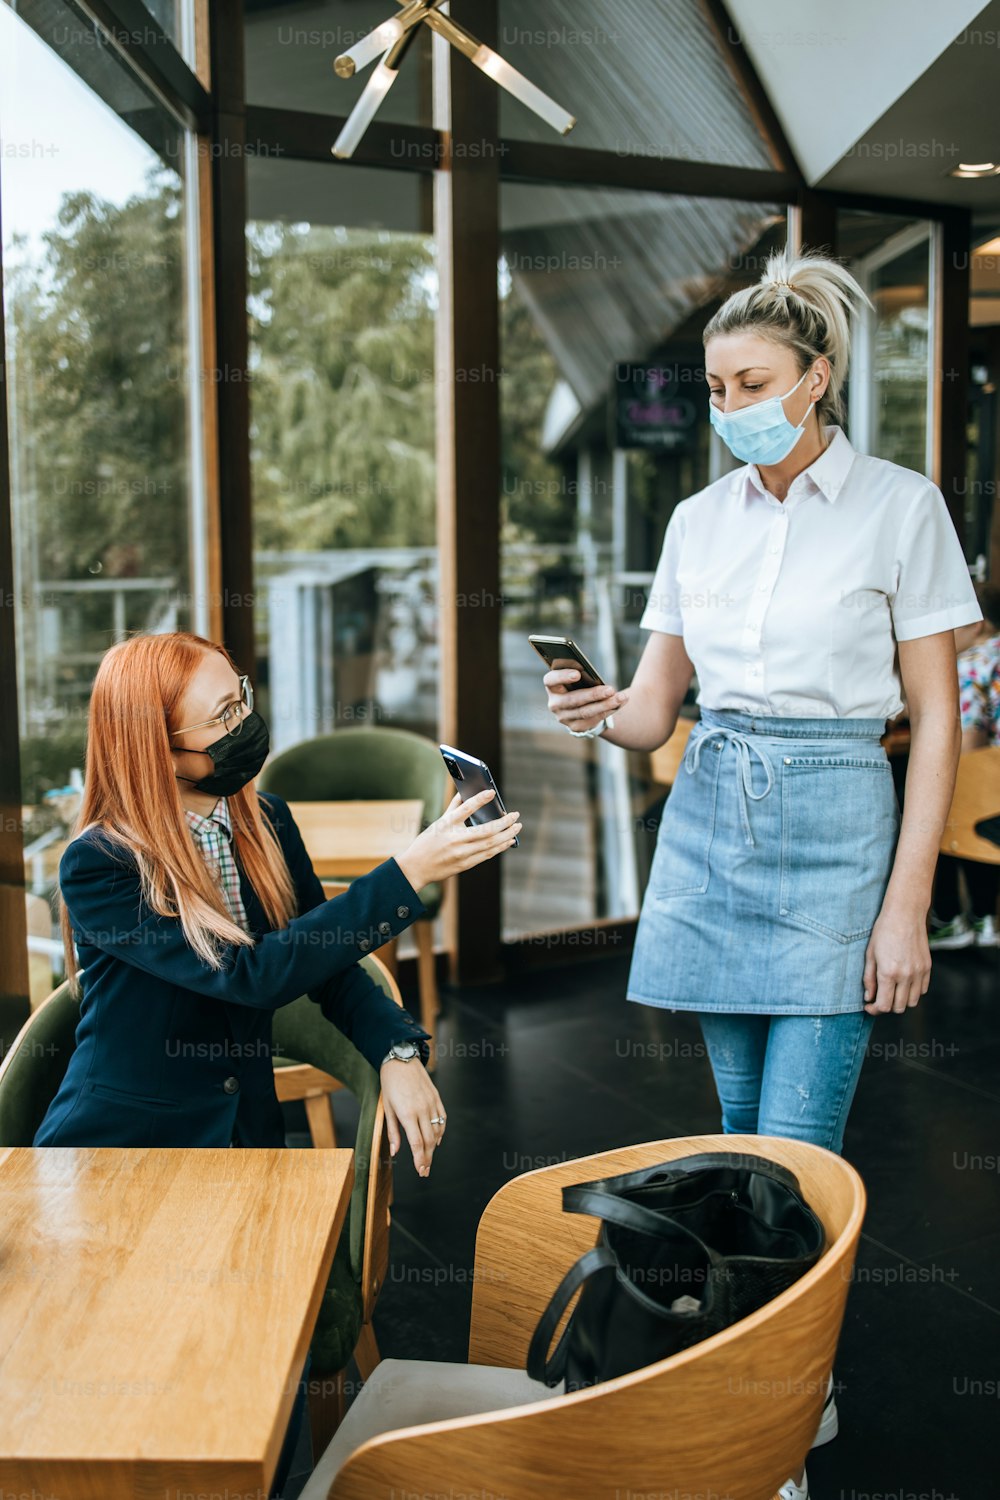 Young attractive business woman sitting in a restaurant or cafe bar and showing digital Covid-19 immunization pass certificate to the security guard. Pandemic and global security measures concept.